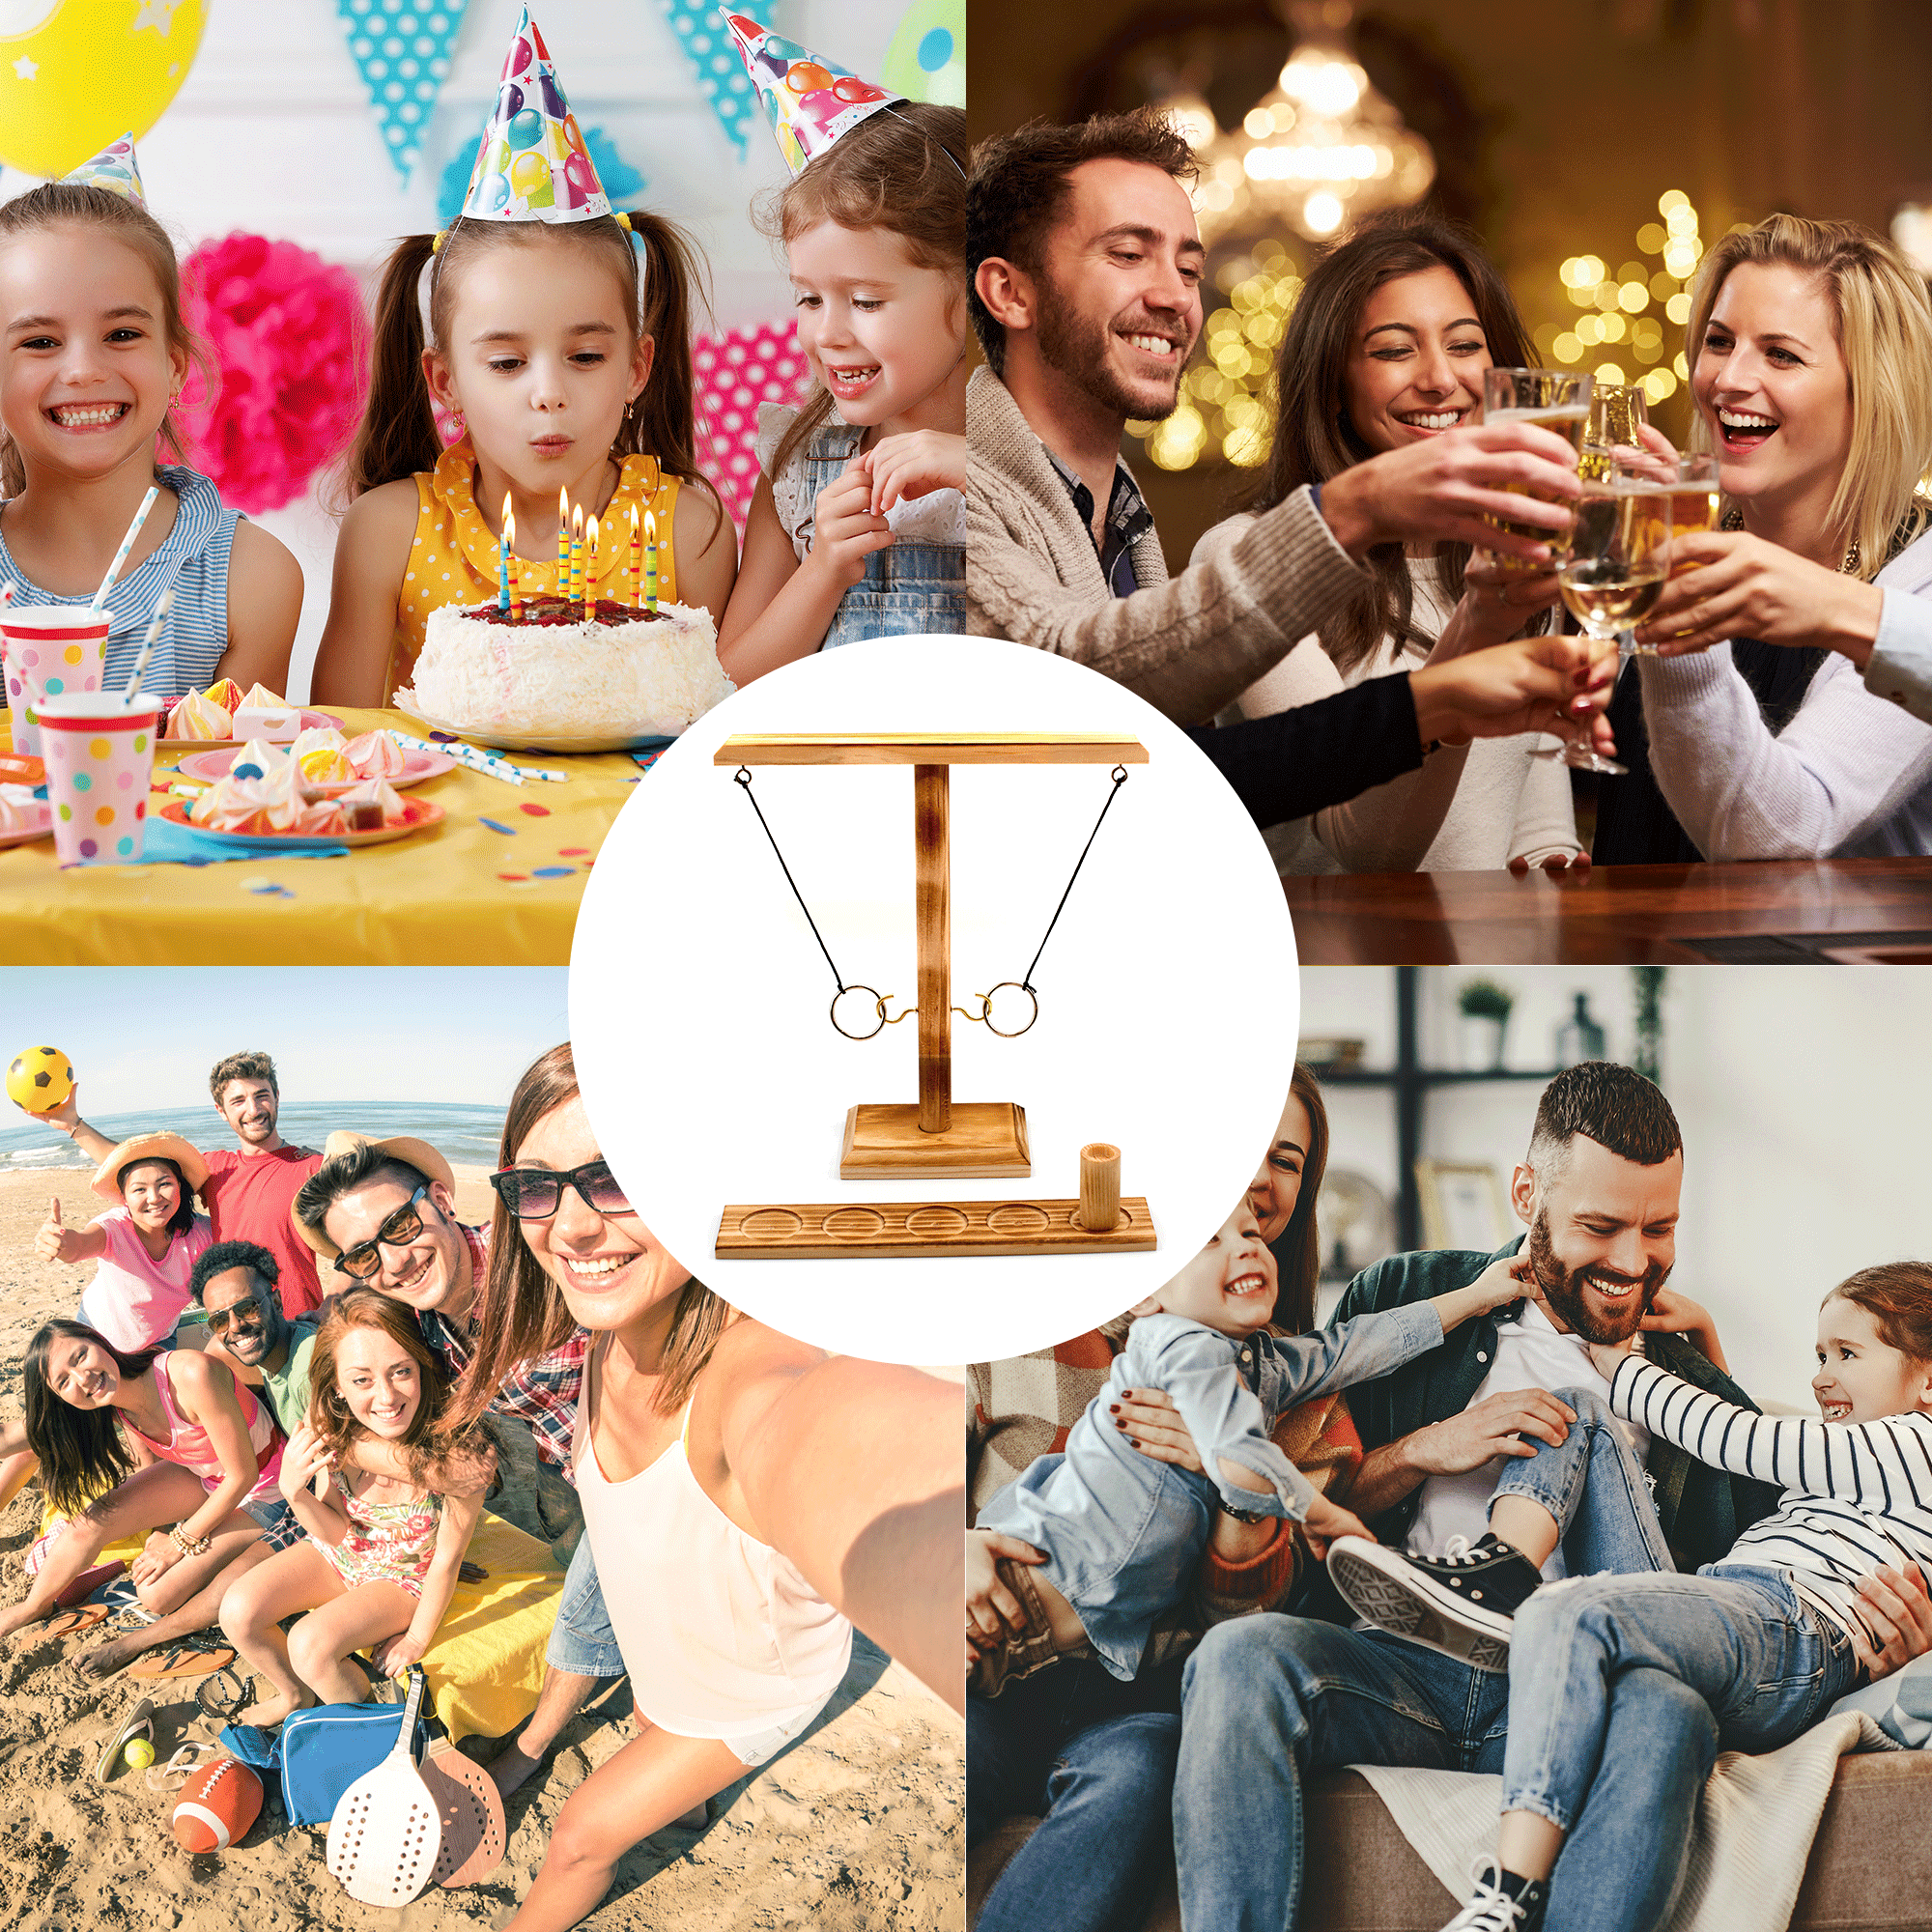 Brown Party Ring Toss Game Home Ring Toss Games for Kids and Adults Outdoor Indoor Handmade Wooden Hooks Fast-paced Interactive Game for Bars 4 Players 